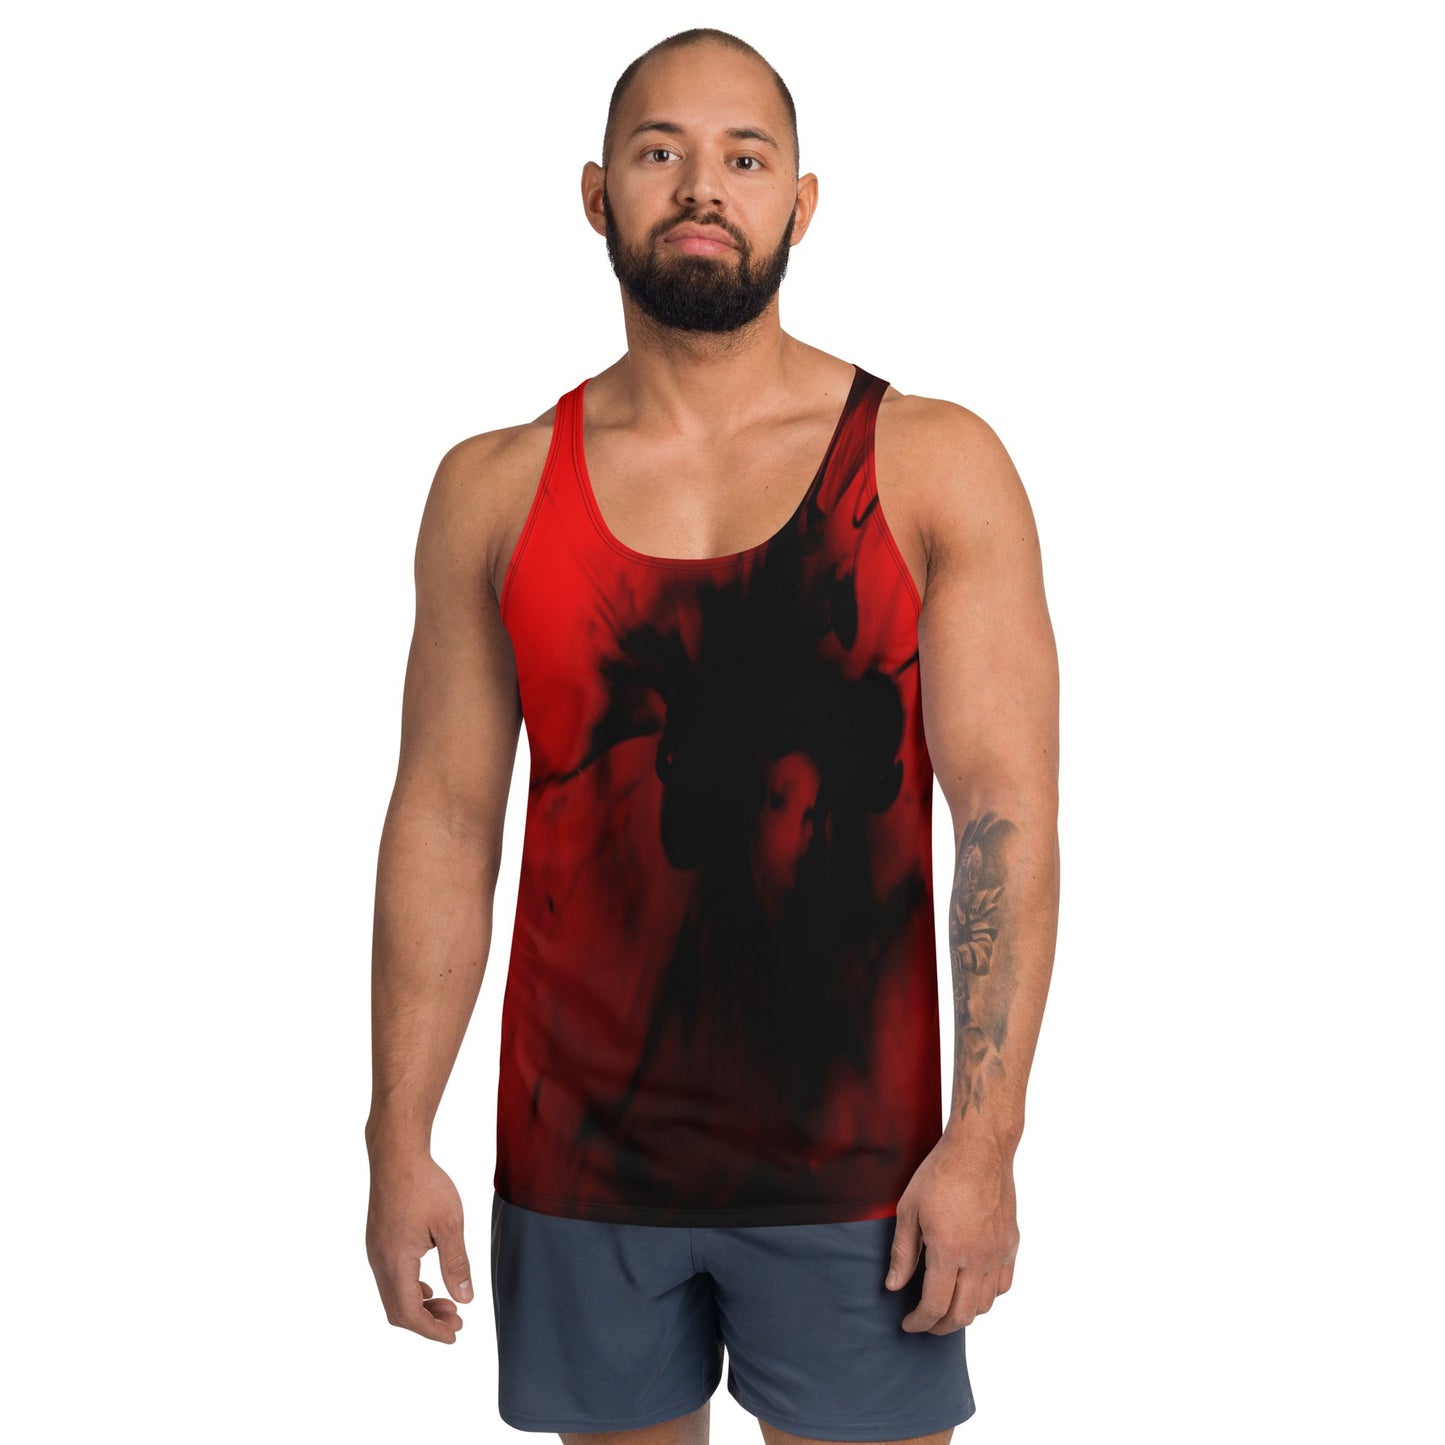 Loved by Ghosts - All-Over Print Men's Tank Top - Souled Out World